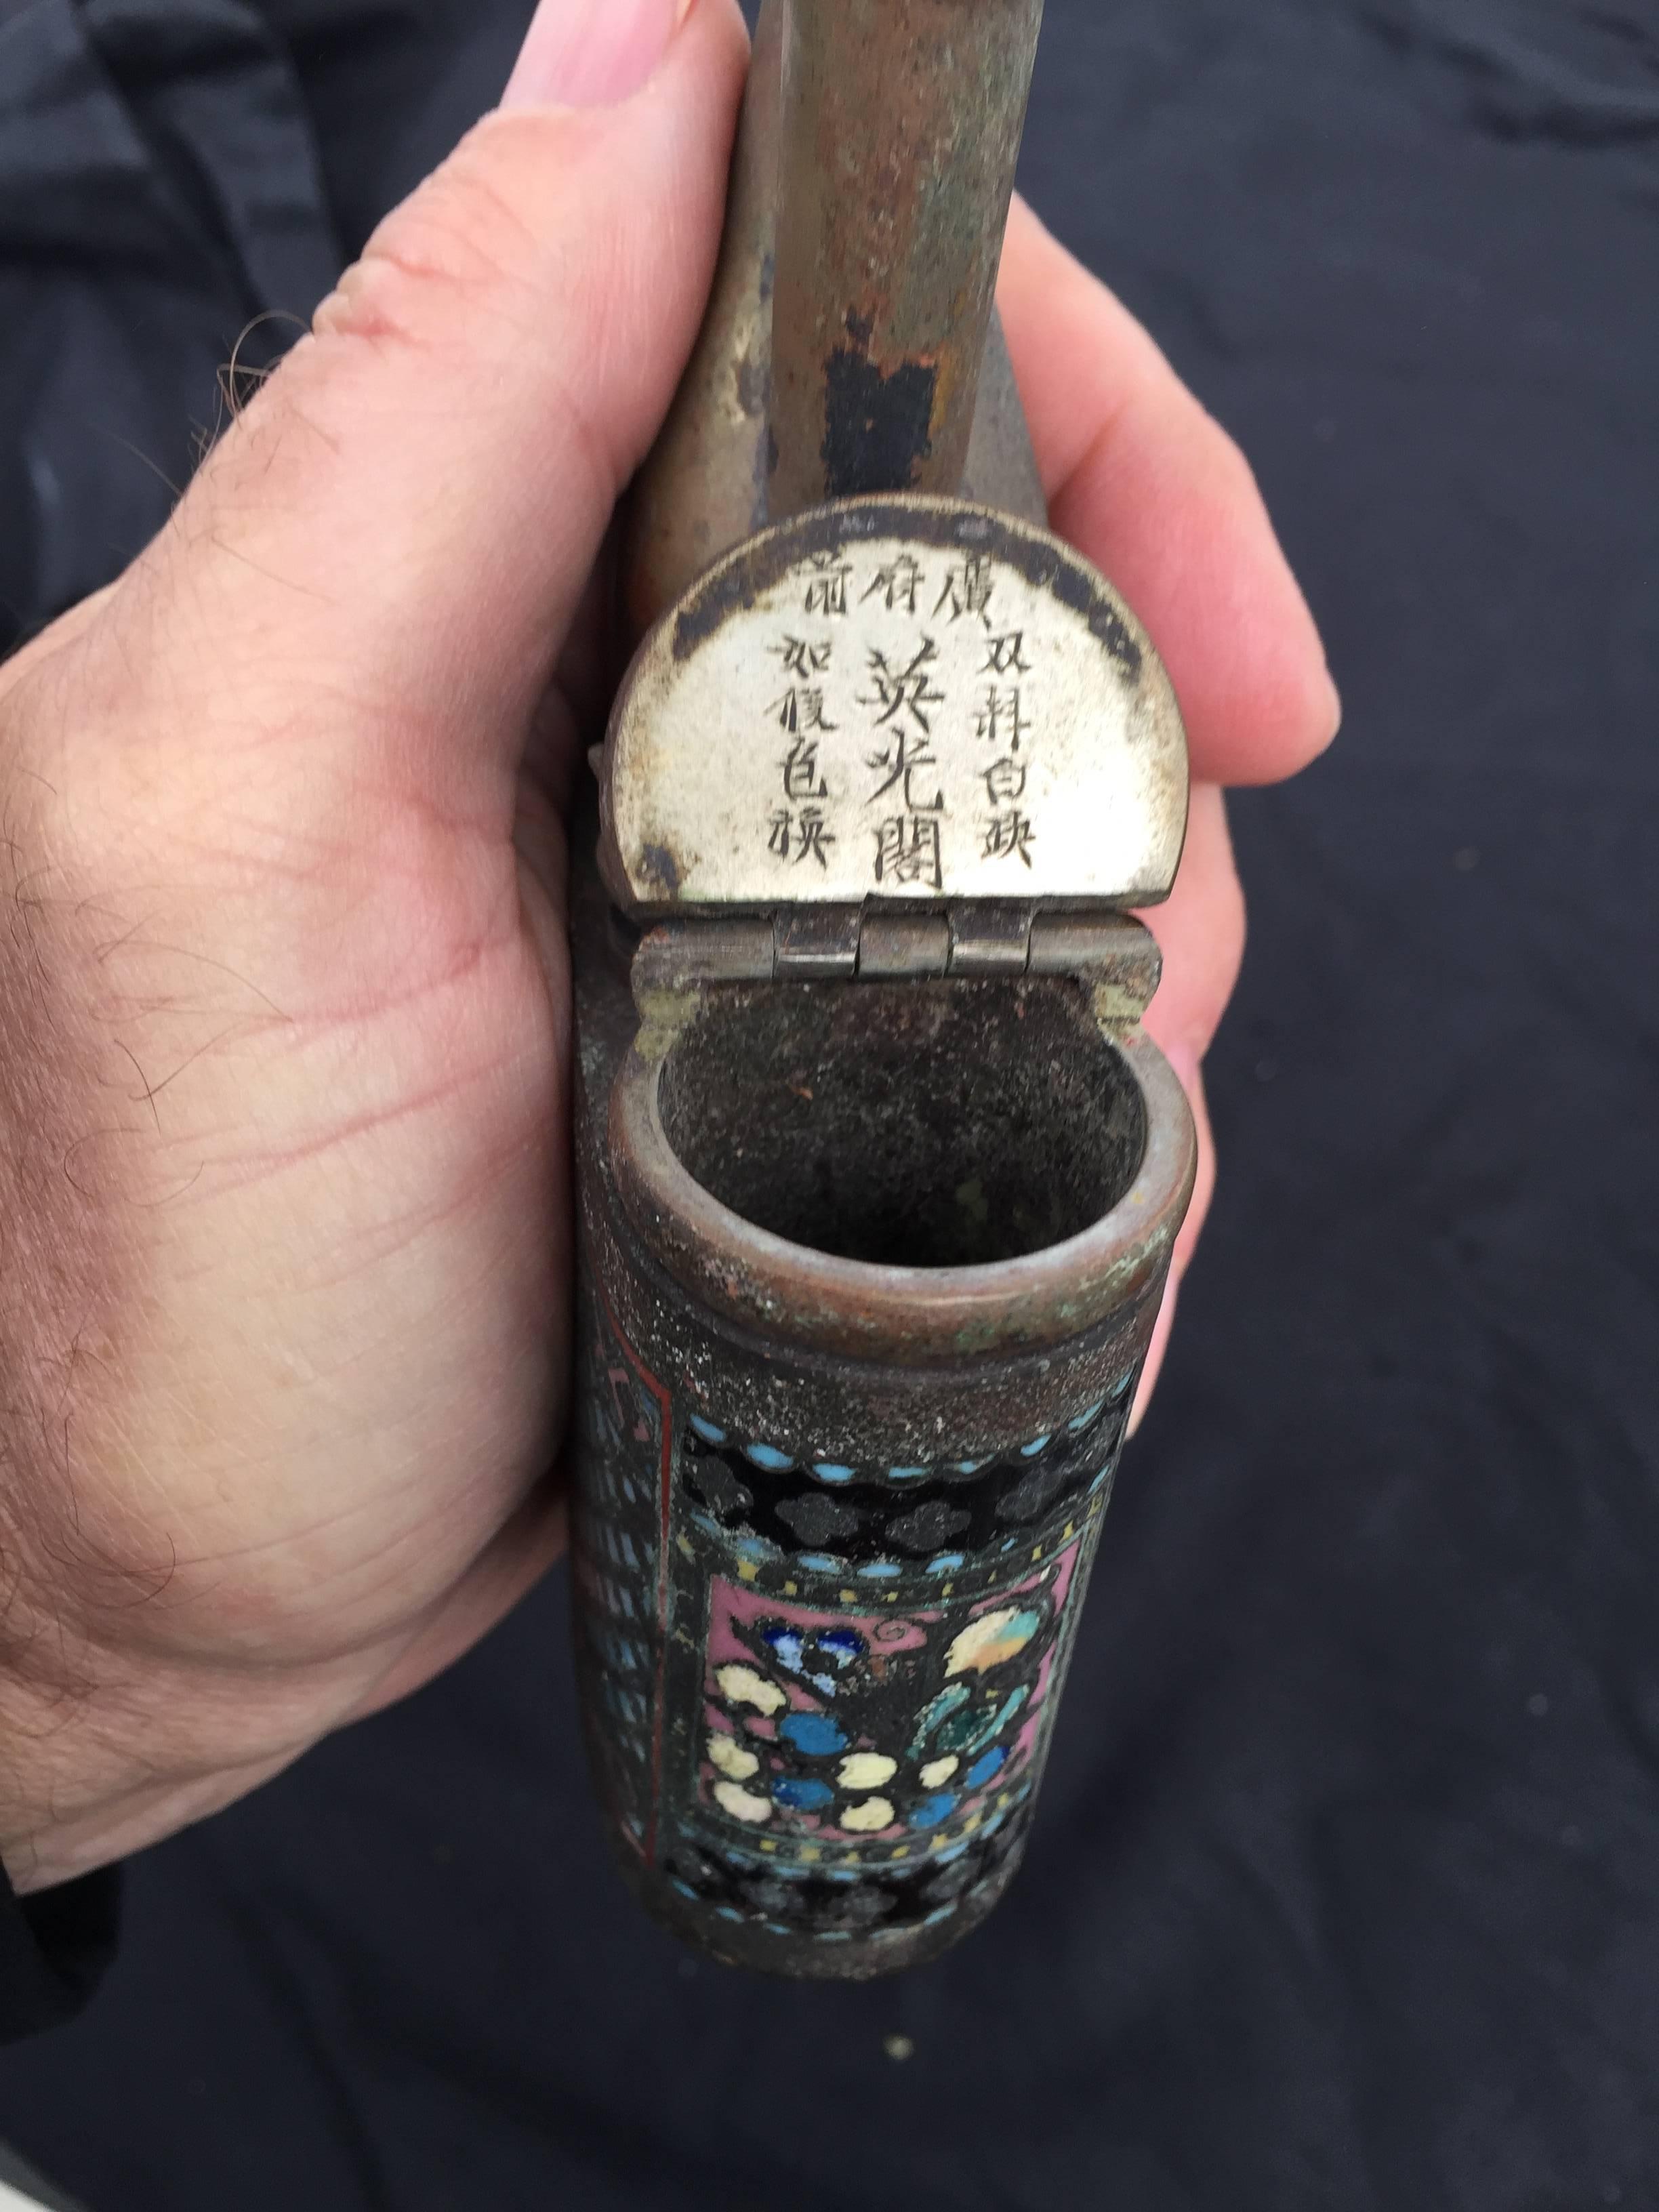 China, a fine enameled opium pipe, complete with all accoutrements, signed under hinged door, 11.25